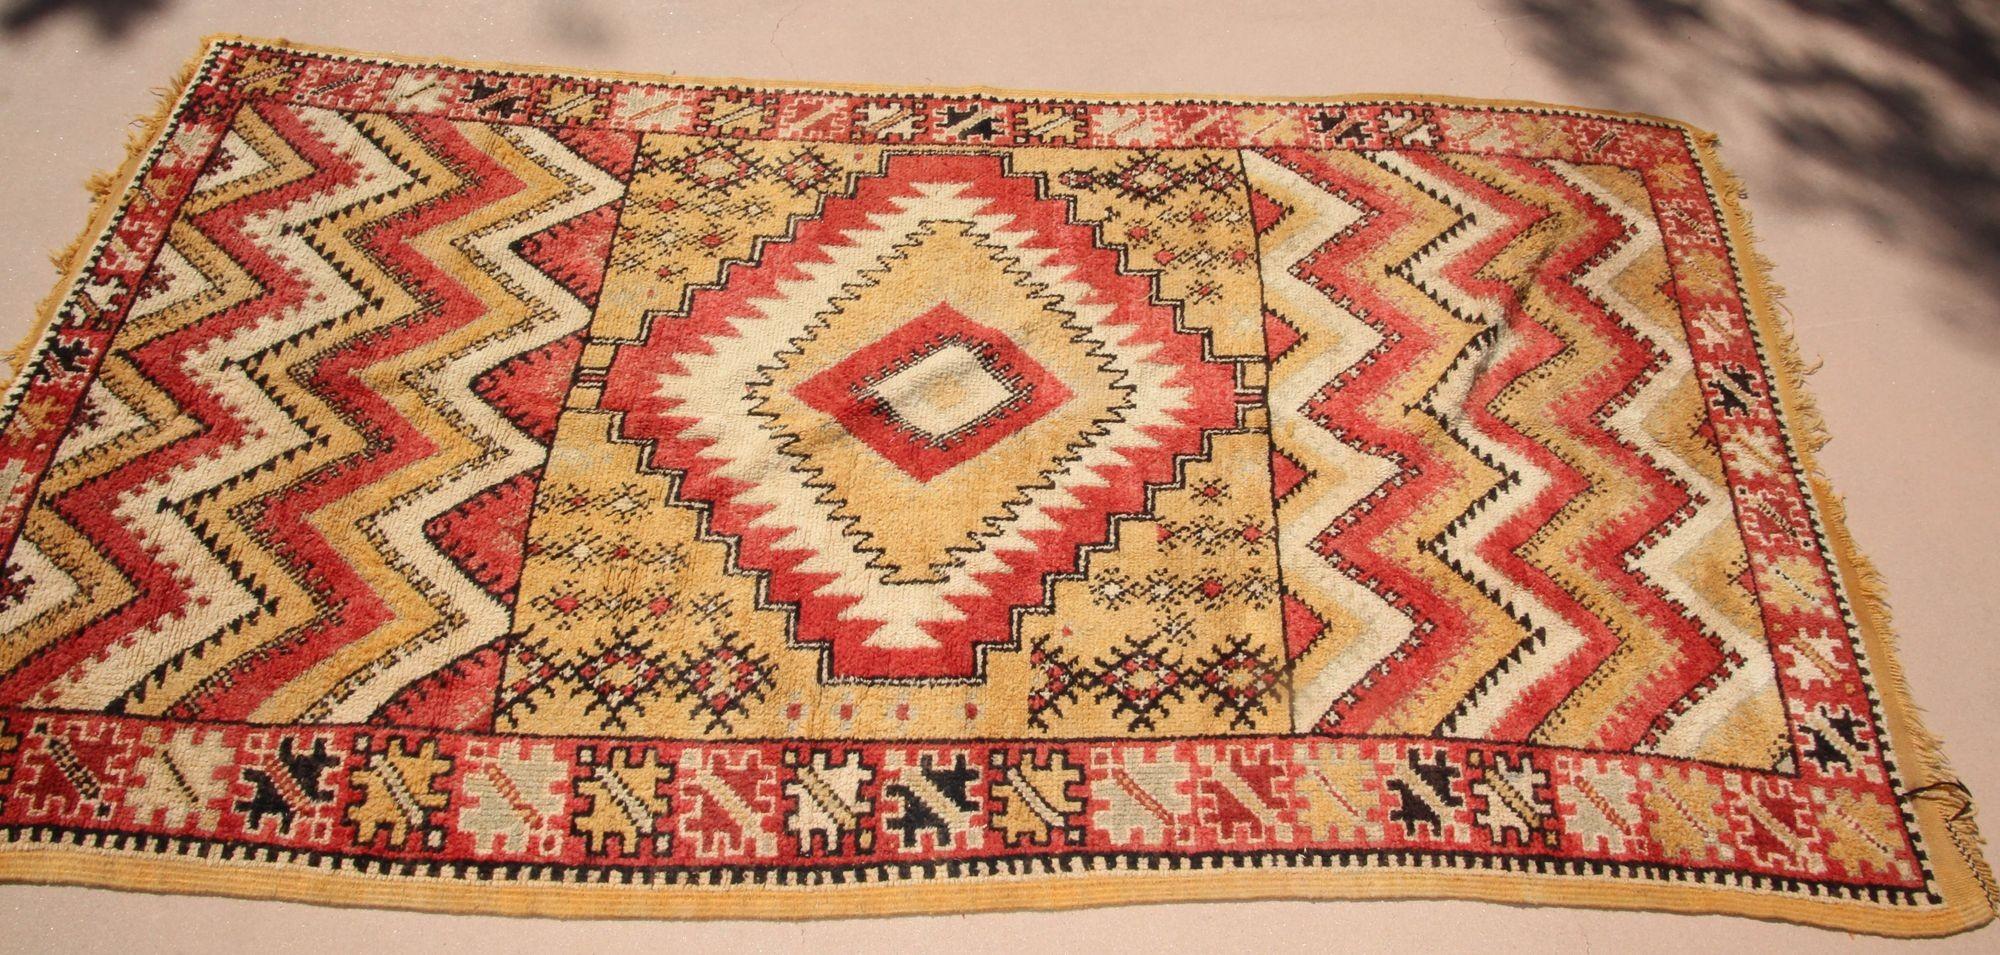 Hand-Crafted 1960s Moroccan authentic Berber Rug Orange Yellow and Ivory 10 ft x 5ft. For Sale